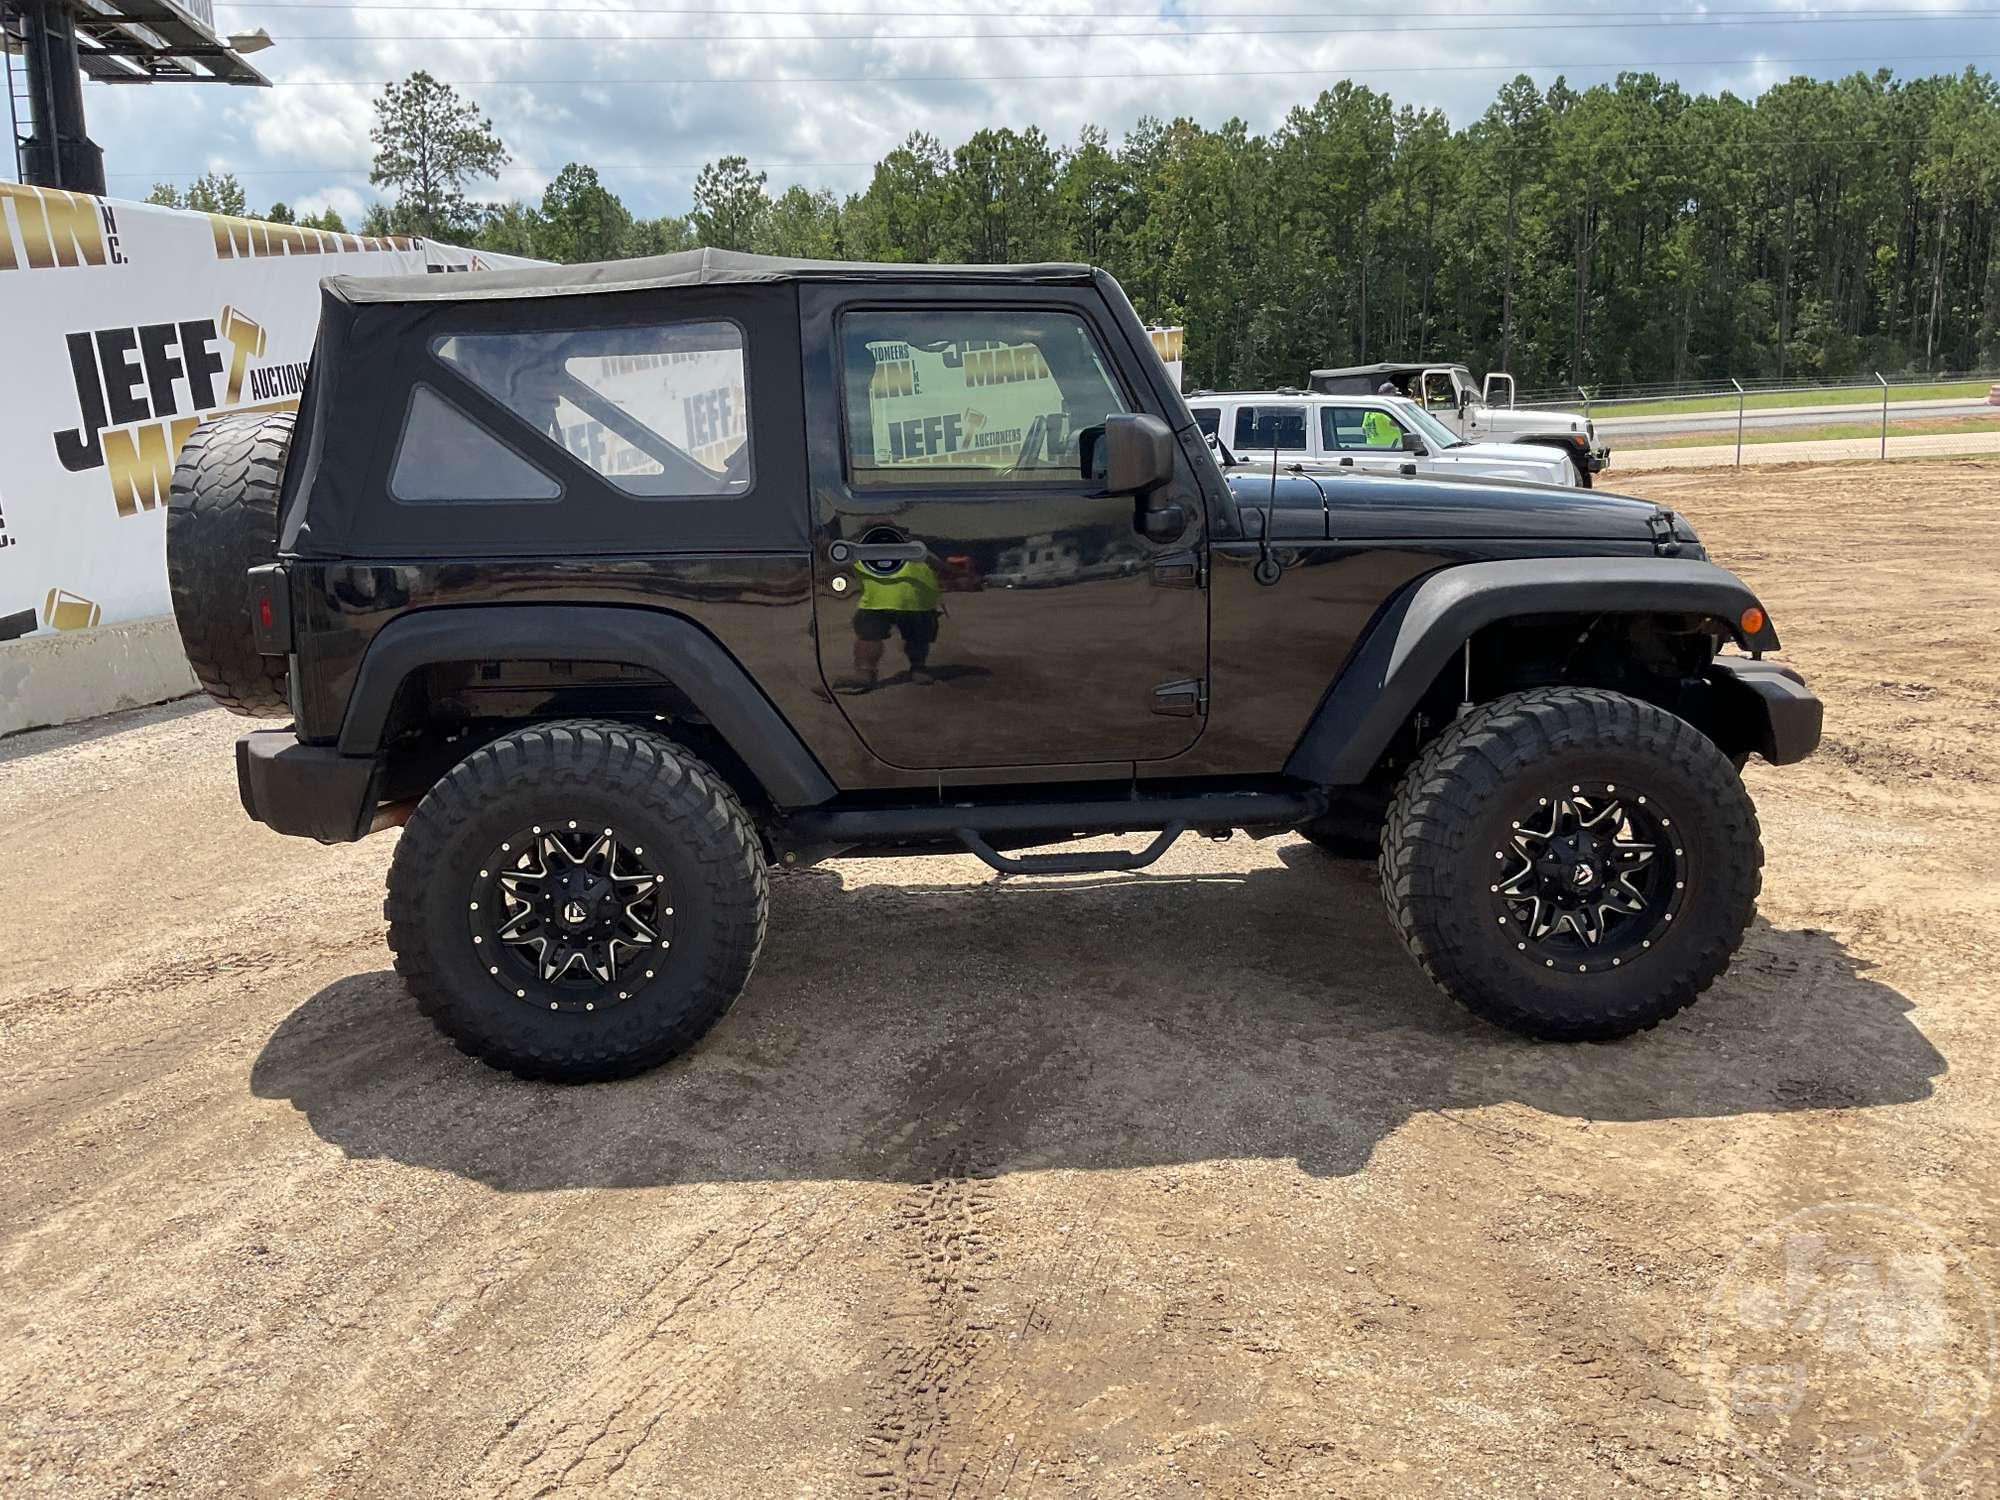 2015 JEEP WRANGLER TRAIL RATED VIN: 1C4AJWAGXFL541354 4WD SUV